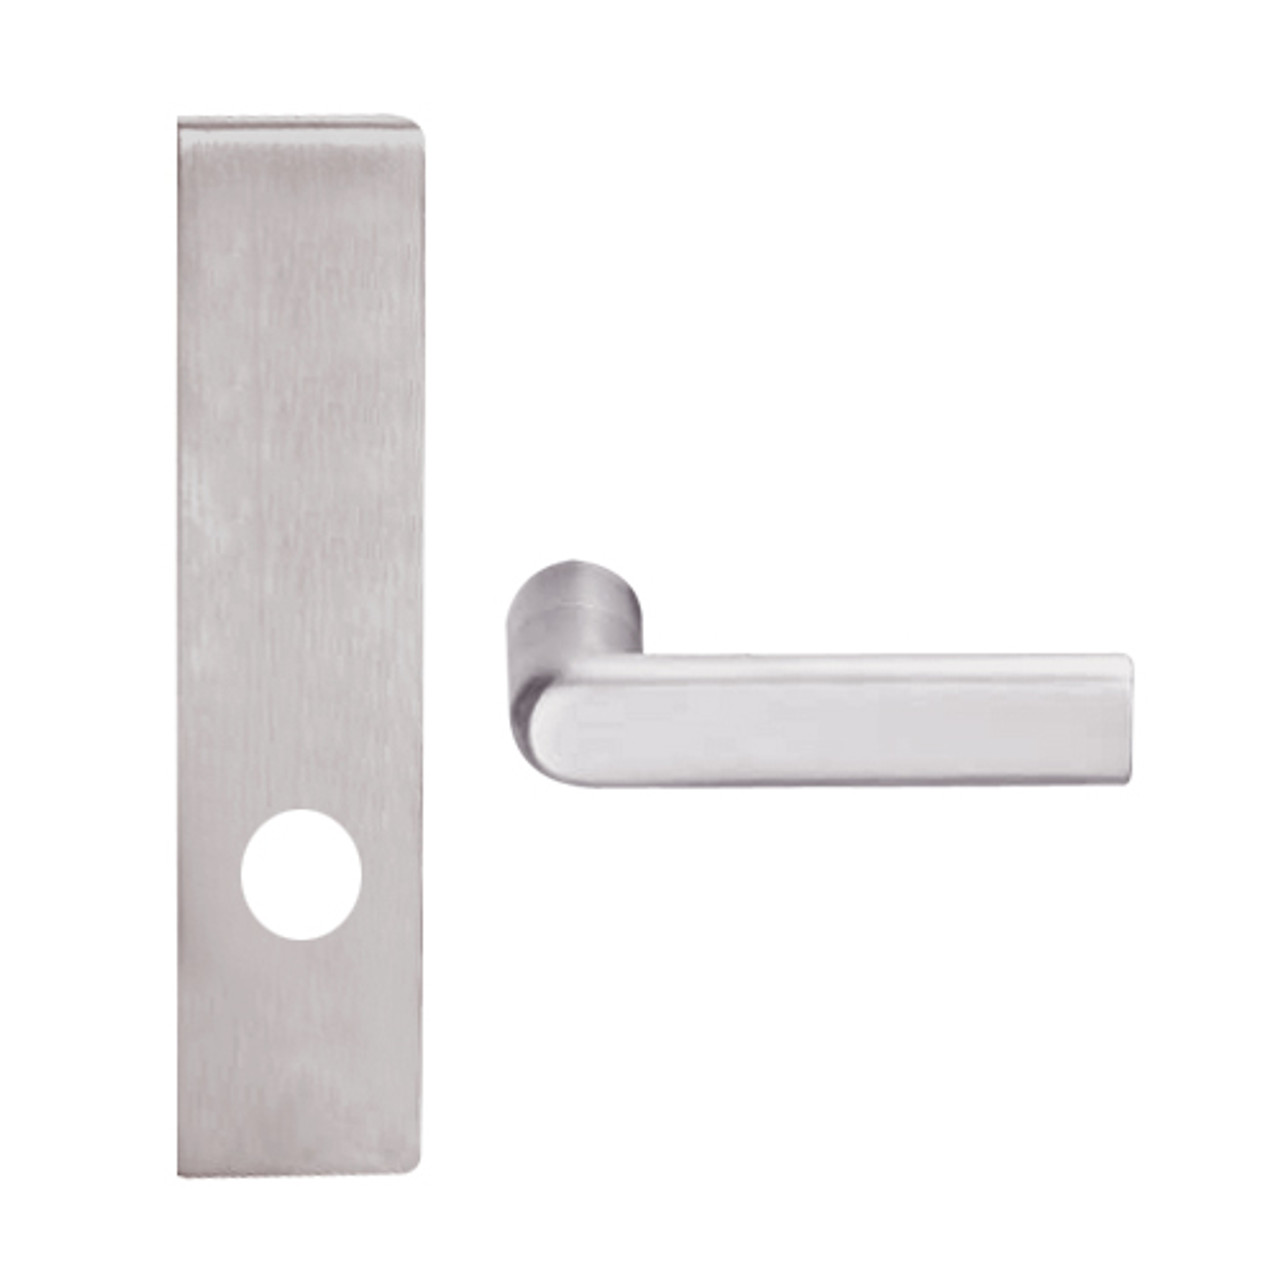 L9025-01L-630 Schlage L Series Exit Commercial Mortise Lock with 01 Cast Lever Design in Satin Stainless Steel